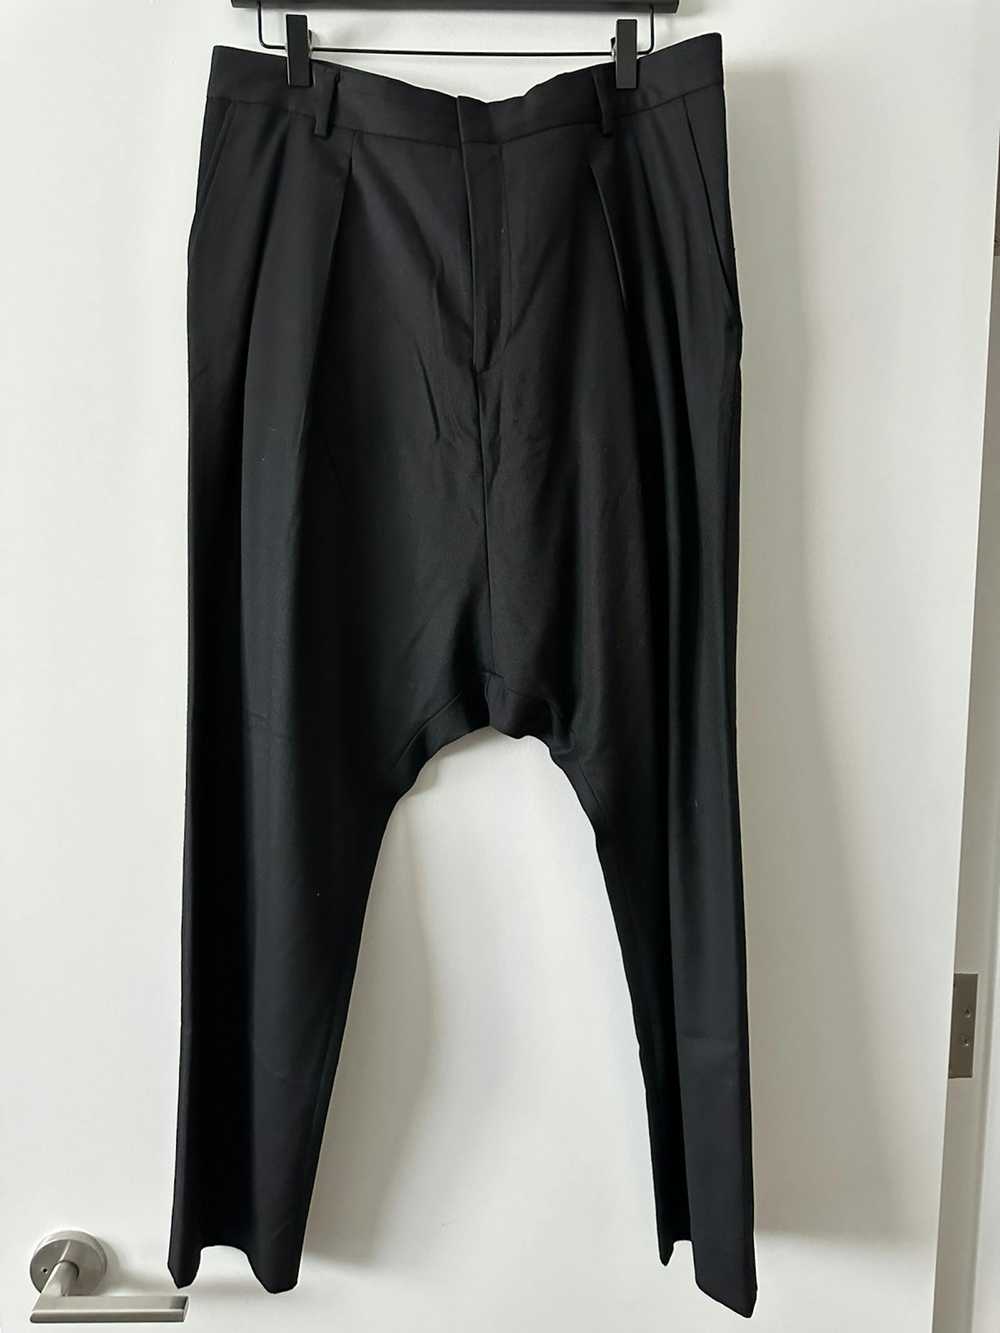 Givenchy Givenchy drop crotch pleated wool pants - image 1